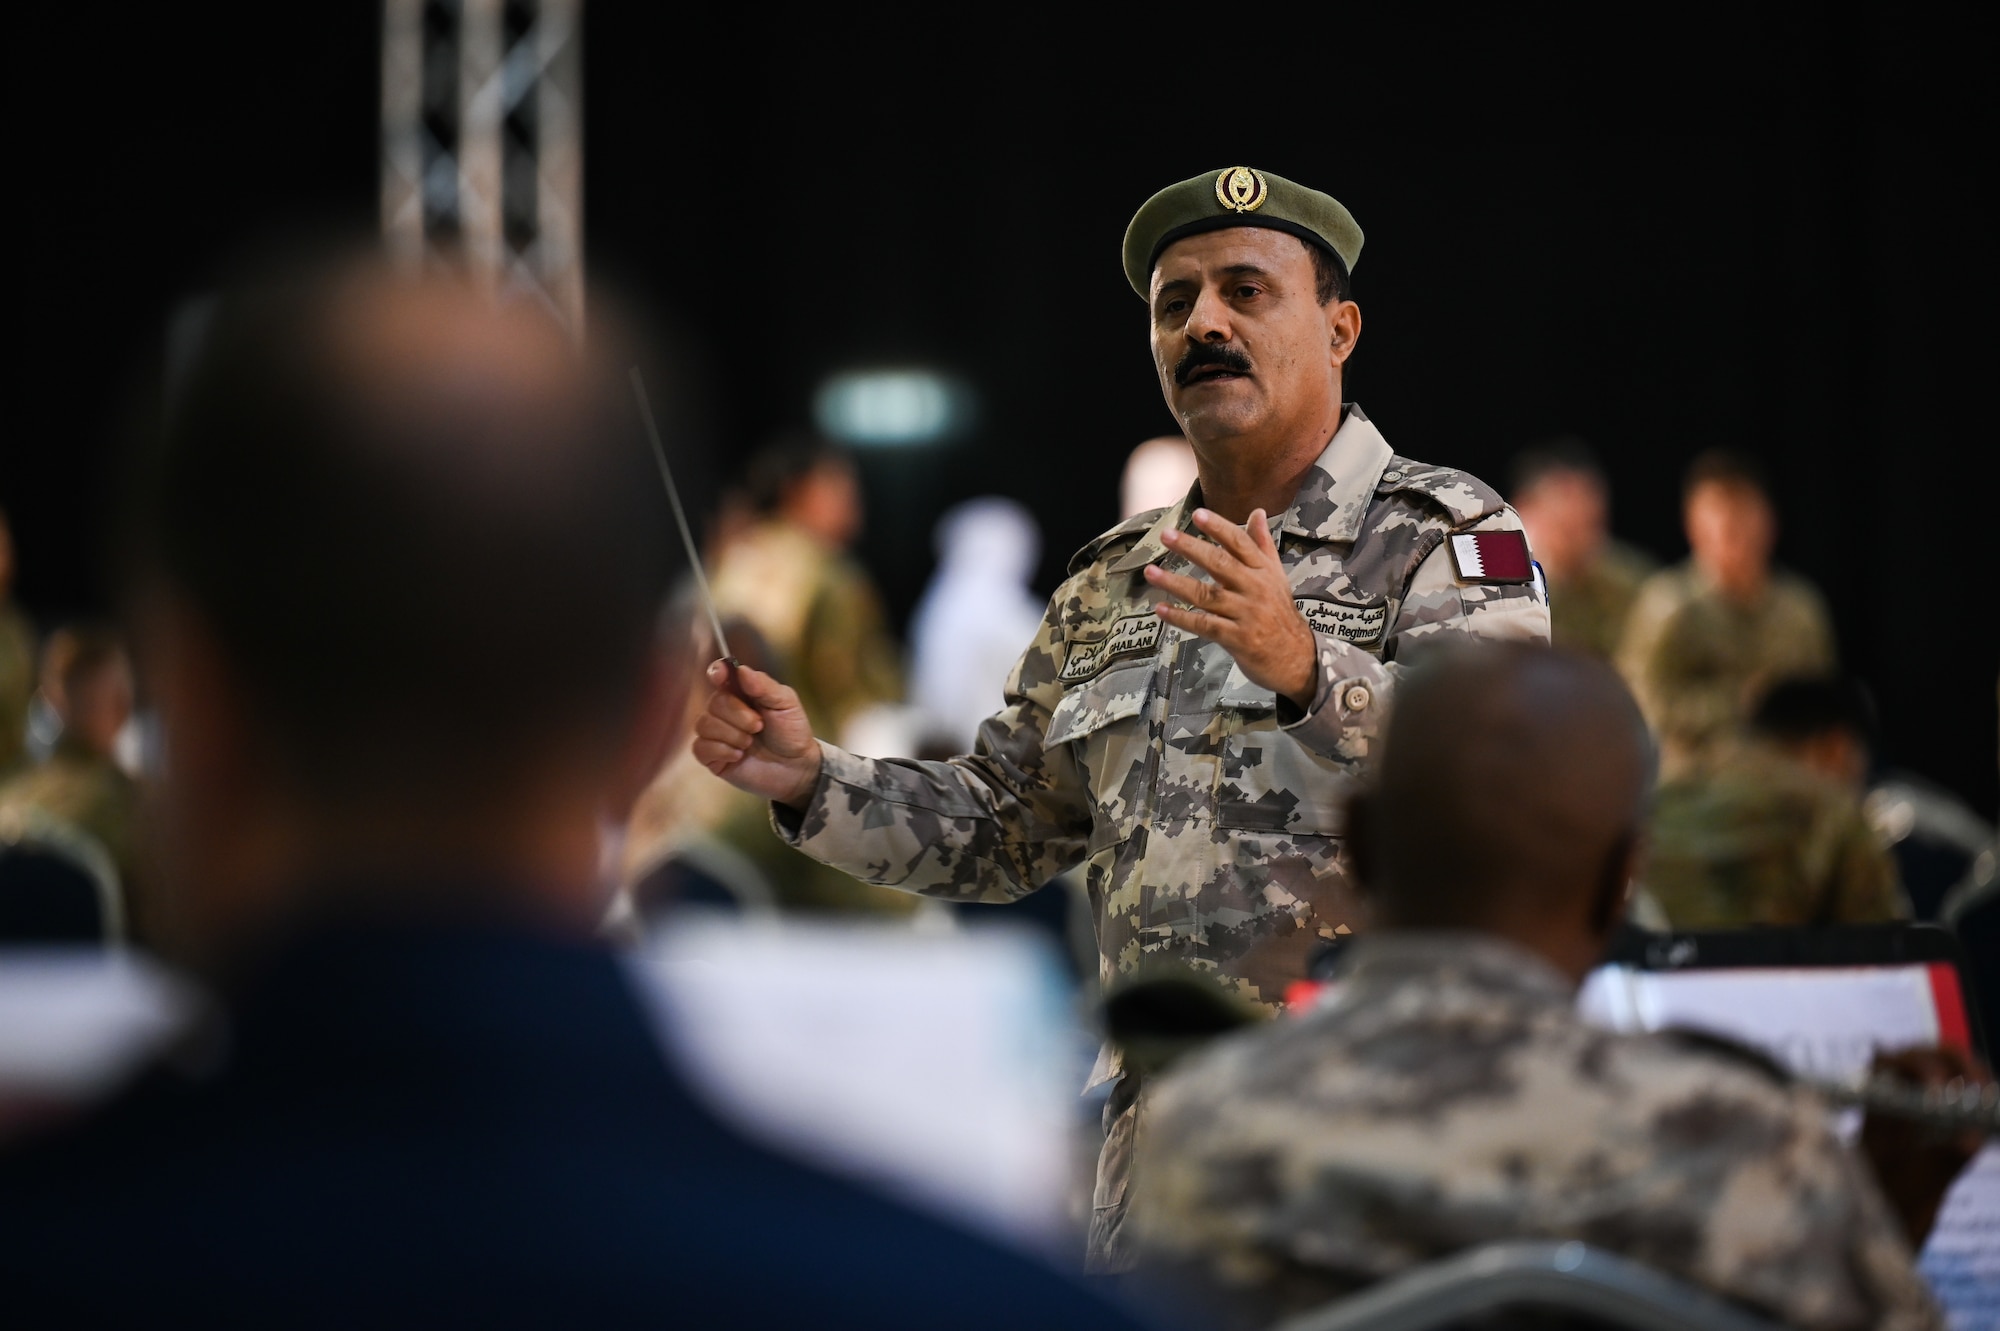 A Qatari Emiri Air Force band member conducts a U.S. Air Force and Qatari joint service band during Lt. Gen. Derek France's change of command ceremony at Al Udeid Air Base, Qatar, April 18, 2024. Hundreds of Airmen, joint and coalition partners, and senior regional military officials attended the ceremony, highlighting the U.S.’s focus on building and maintaining critical partnerships through a collective vision for peace and security throughout the region. (U.S. Air Force photo)